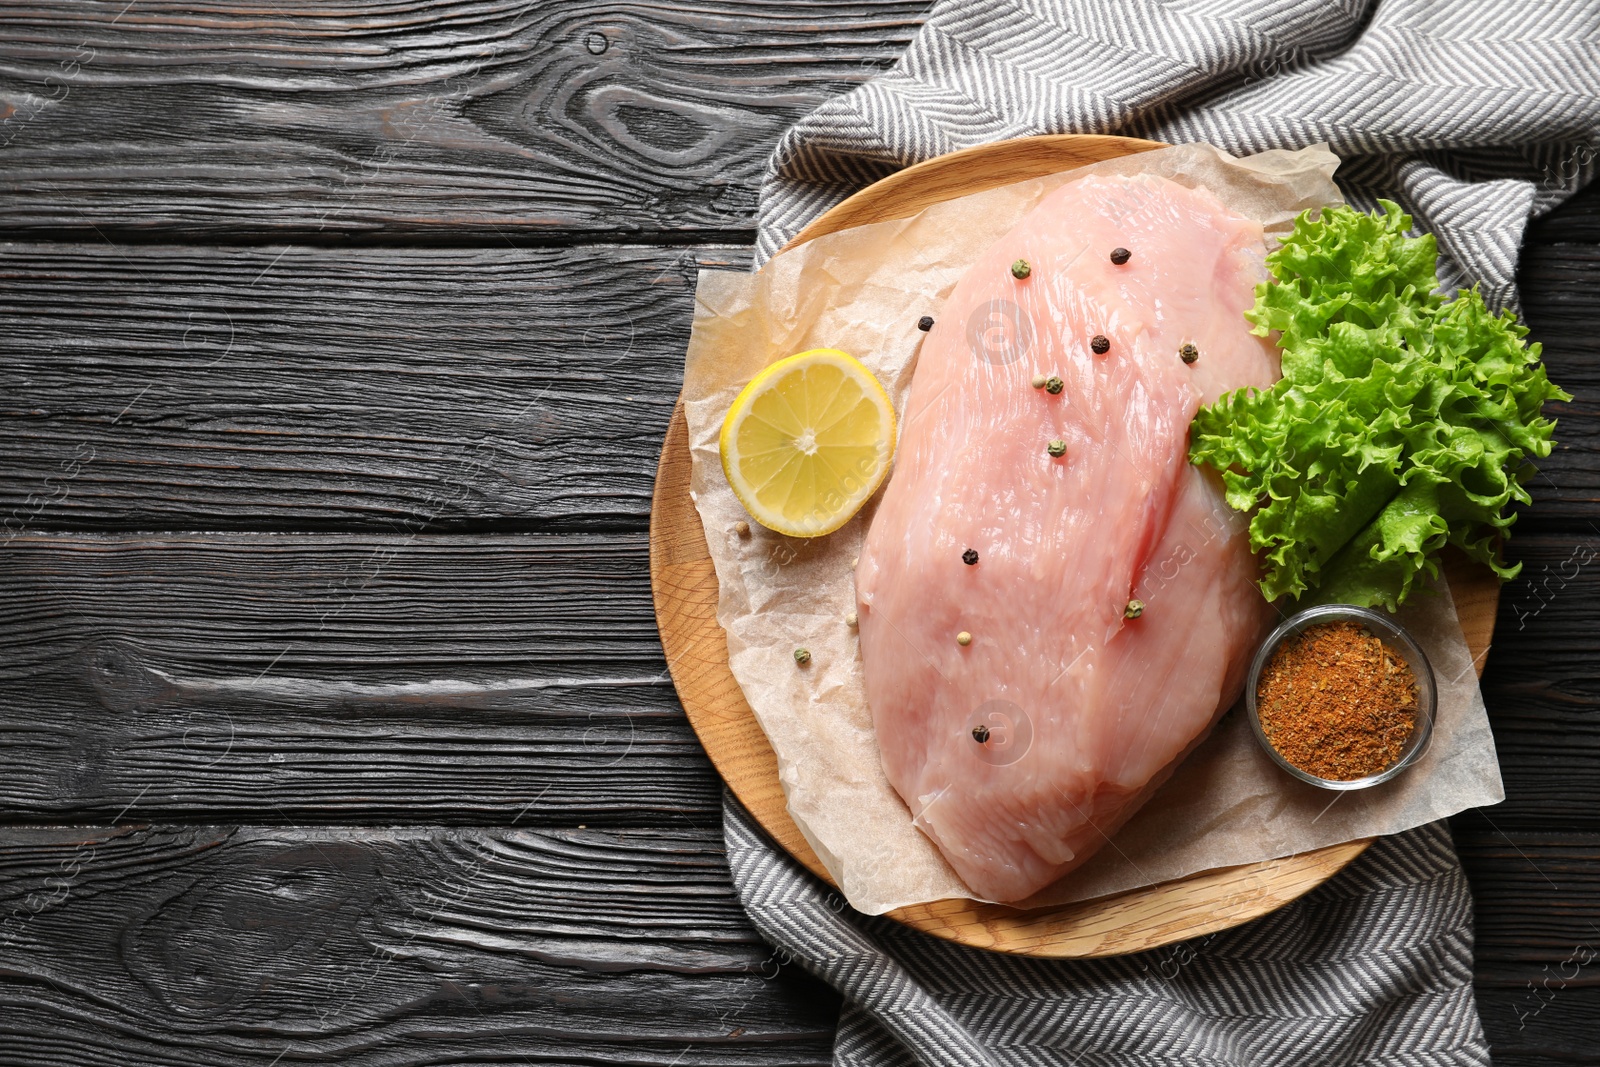 Photo of Plate with raw turkey fillet and ingredients on wooden background, top view. Space for text